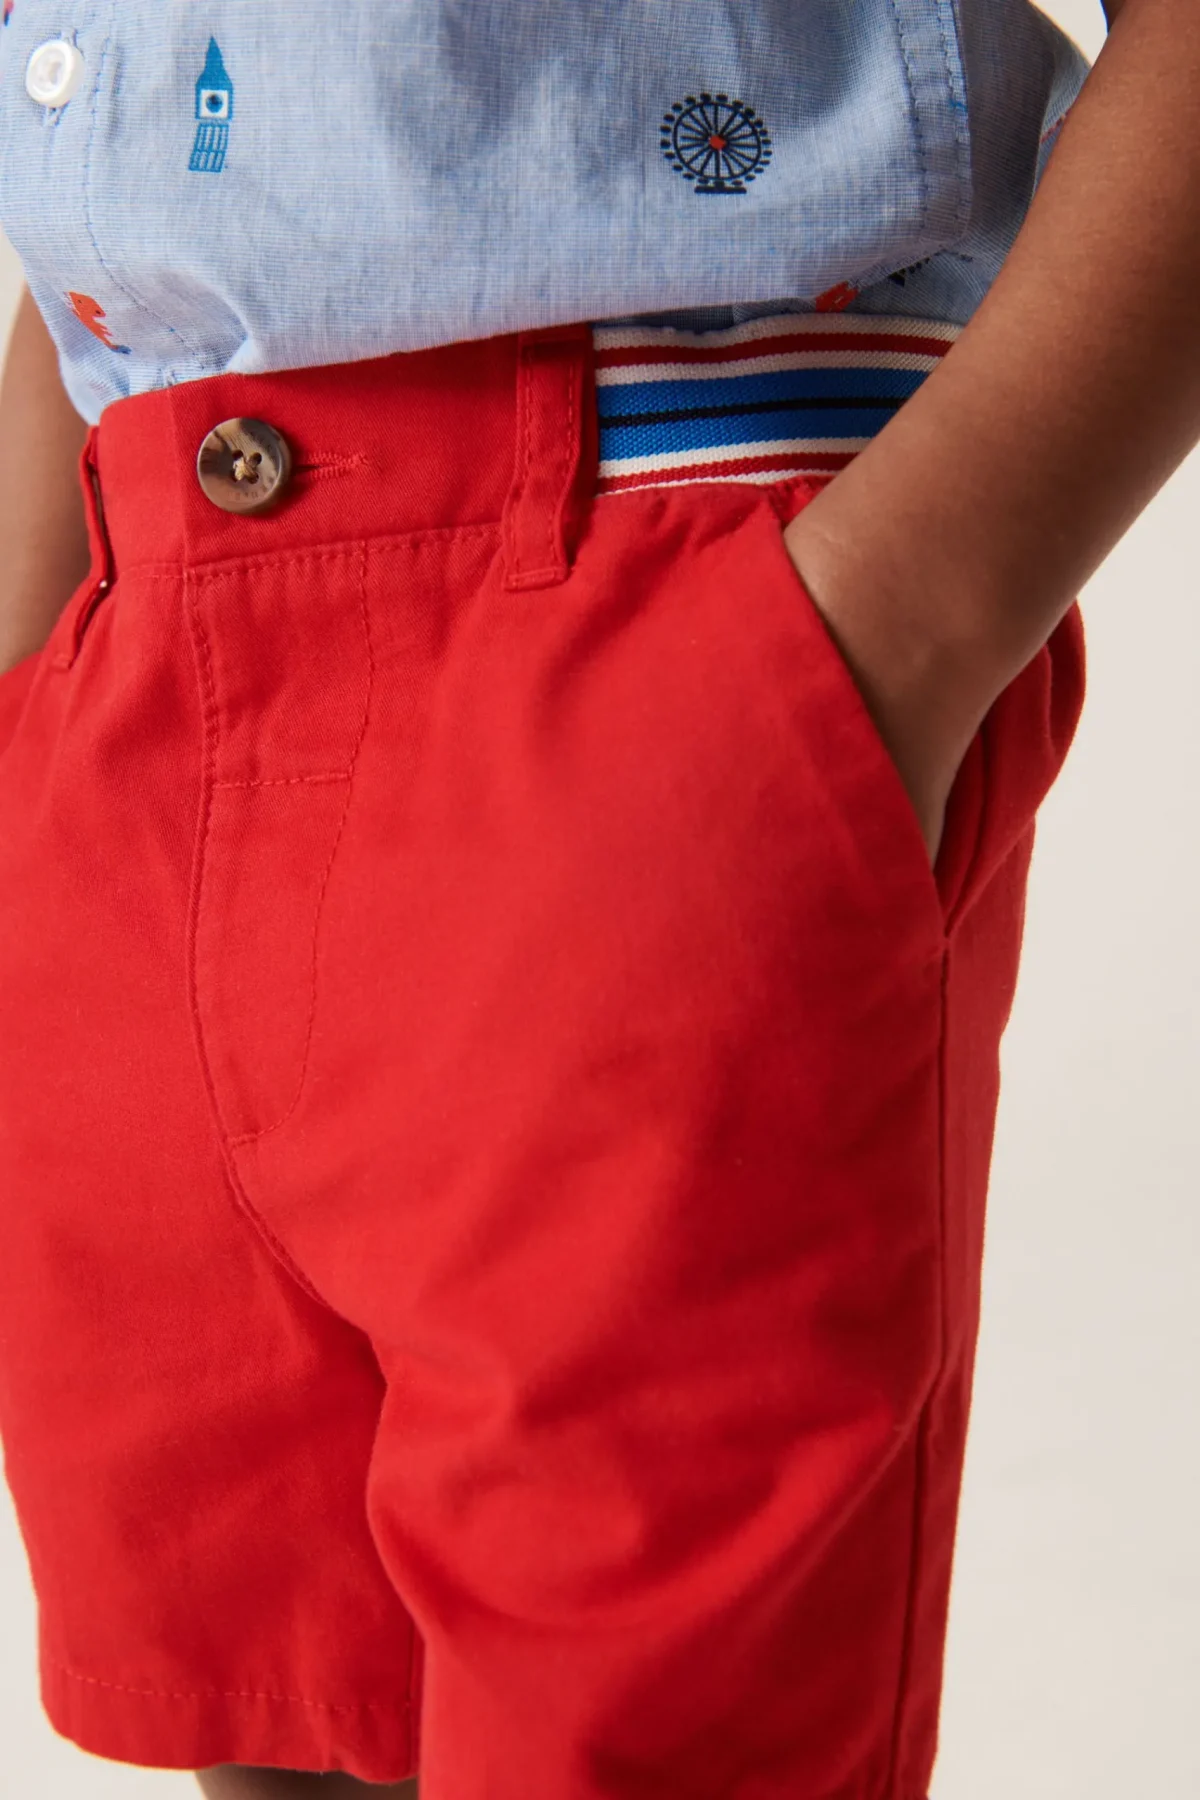 official set of red shirt and shorts with dinosaur design